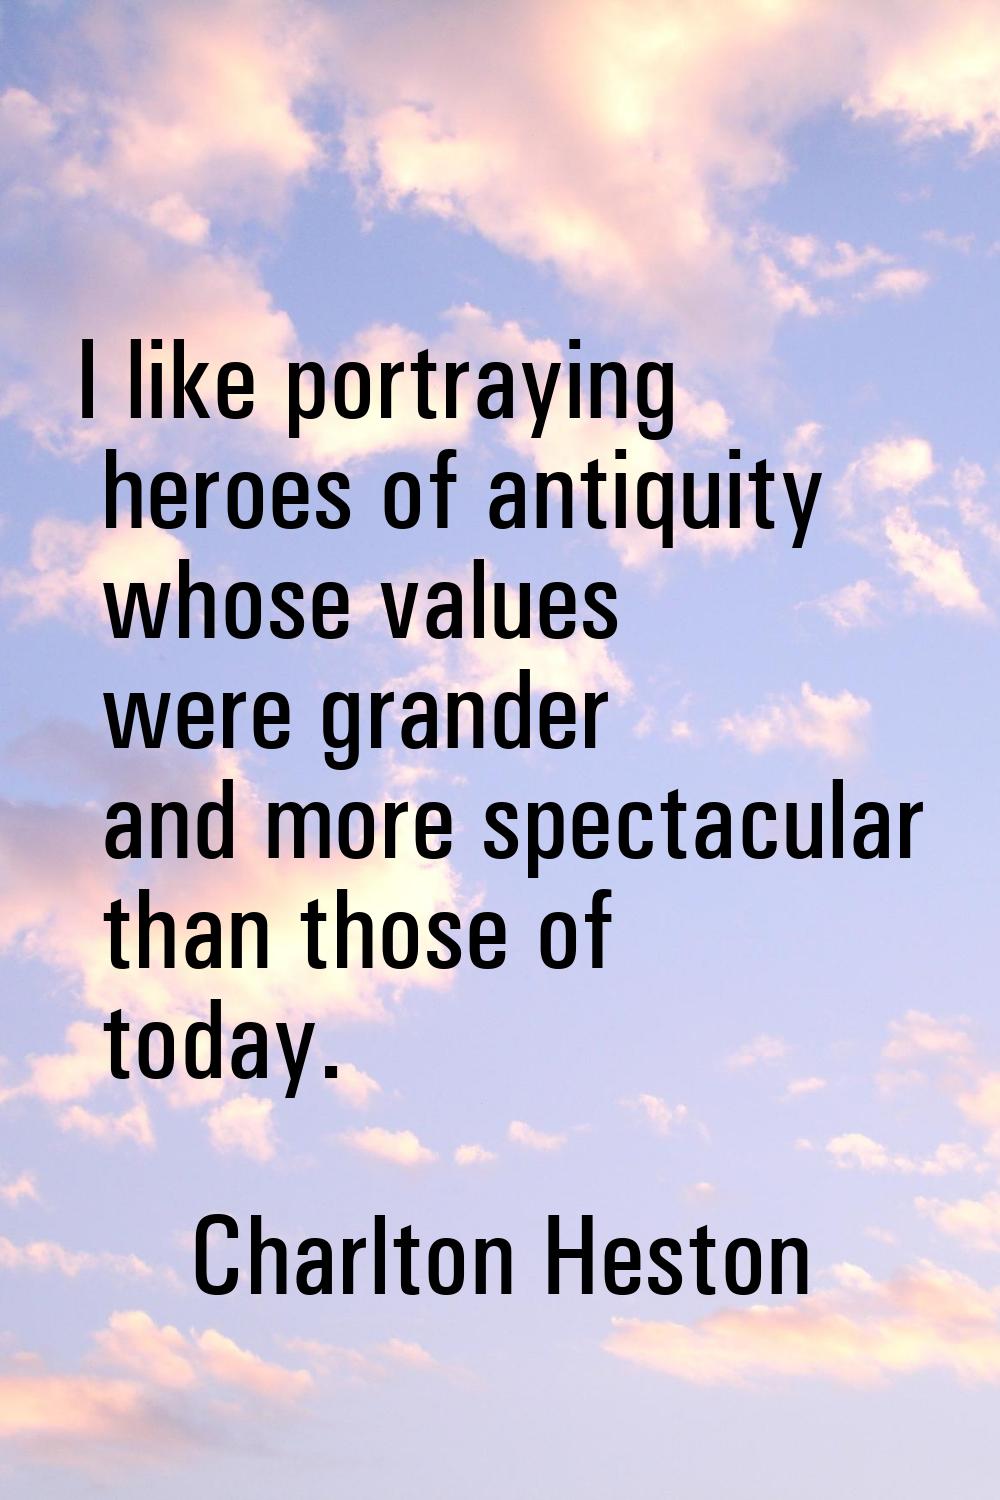 I like portraying heroes of antiquity whose values were grander and more spectacular than those of 